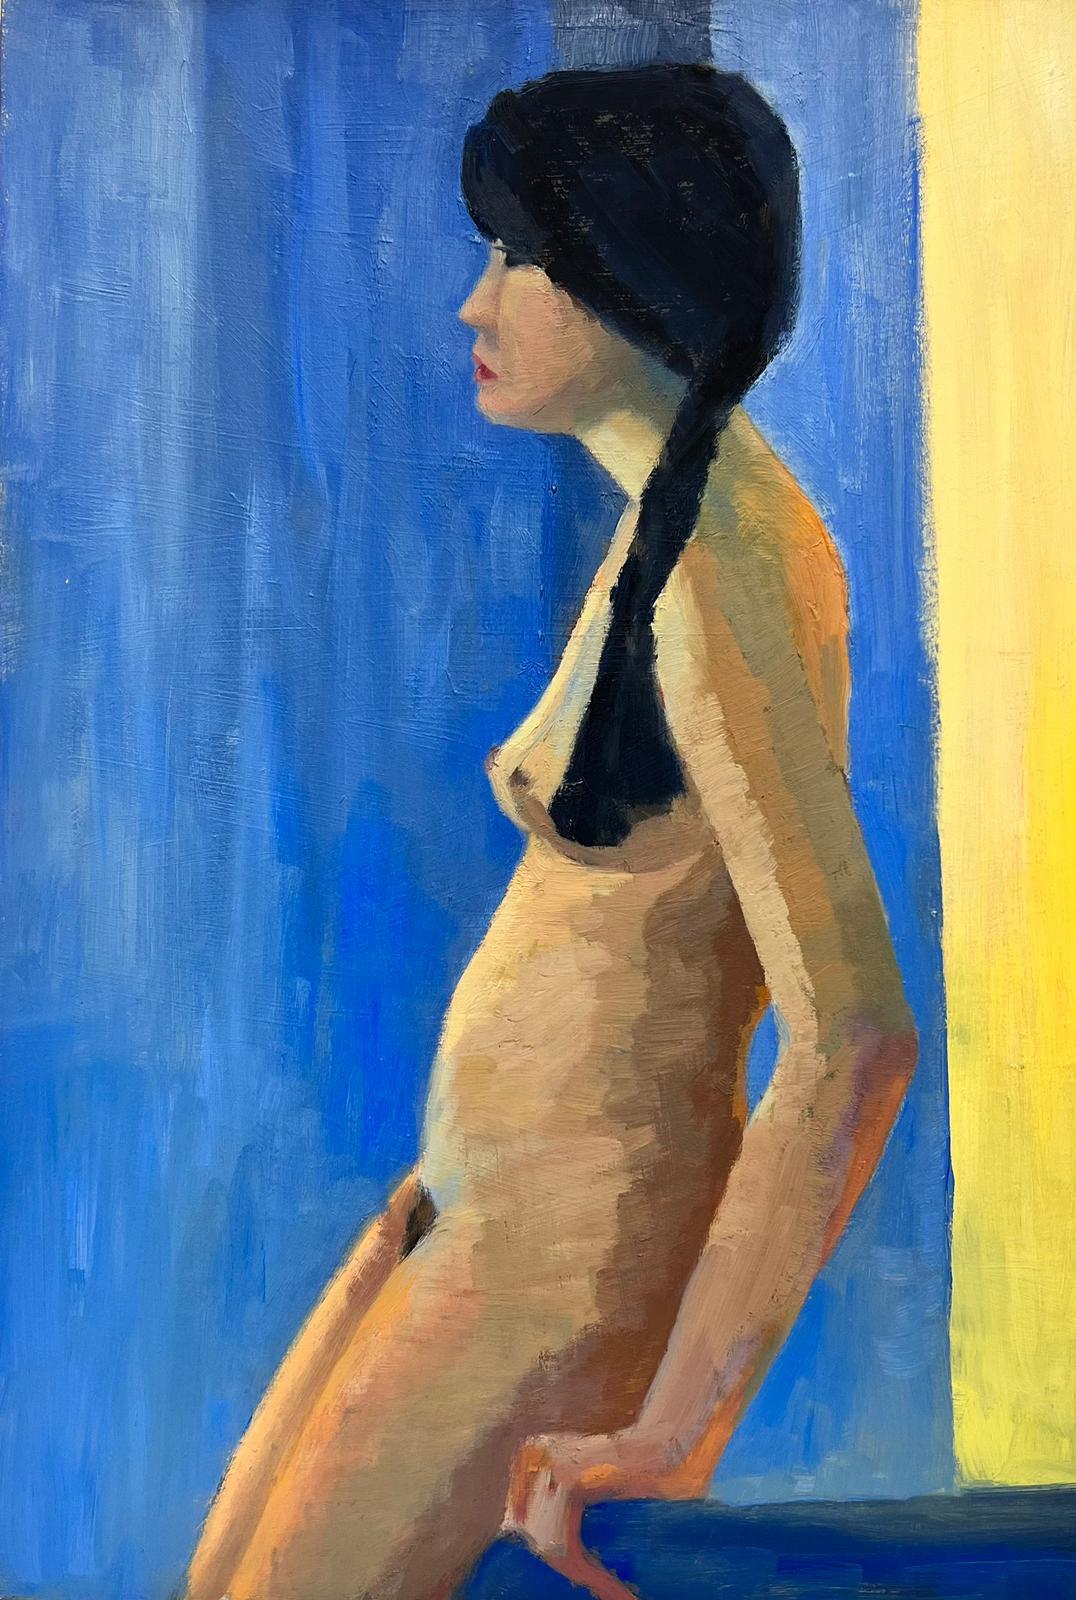 Jill Jackson Nude Painting - Contemporary British Oil Portrait of a Nude Lady Blue & Yellow background colors